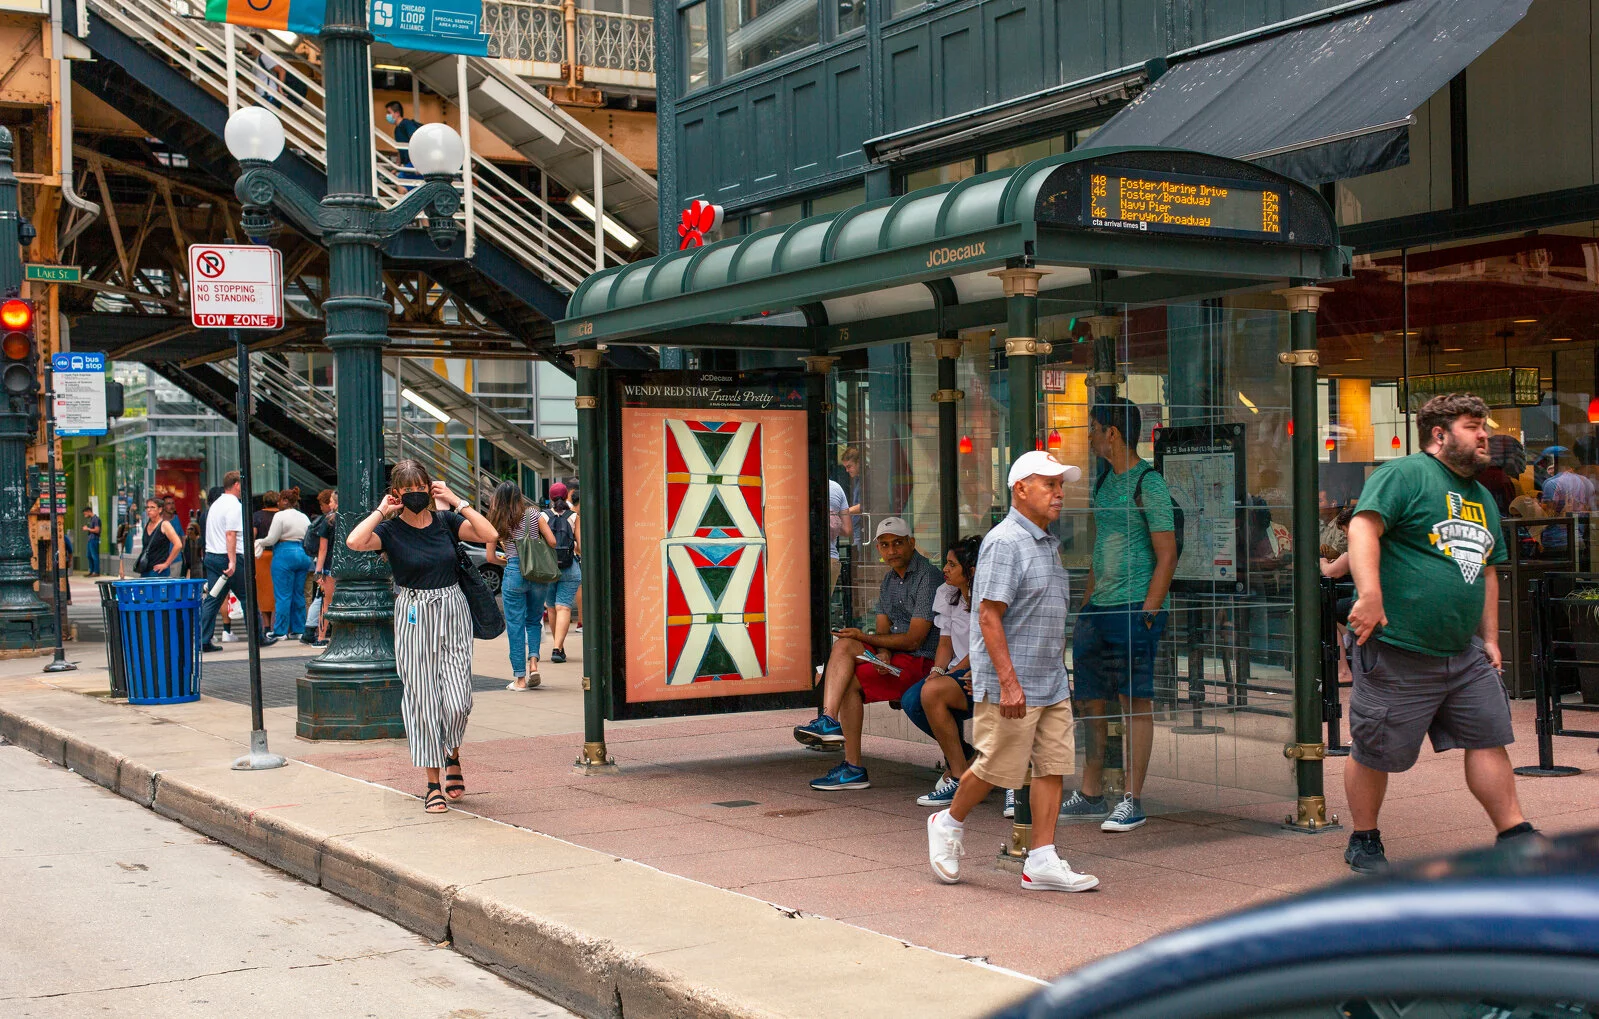 Wendy Red Star, <i>Brings Together</i>, 2022. Courtesy of the artist. Photo: David Sampson, courtesy of Public Art Fund, NY. Artwork part of <i>Wendy Red Star: Travels Pretty</i>, presented in Chicago by Public Art Fund on 300 JCDecaux bus shelters across New York City, Boston, and Chicago, on view August 10—November 20, 2022. 2022/09/PAF-Aug22-WendyRedStar-v2-1.jpg 